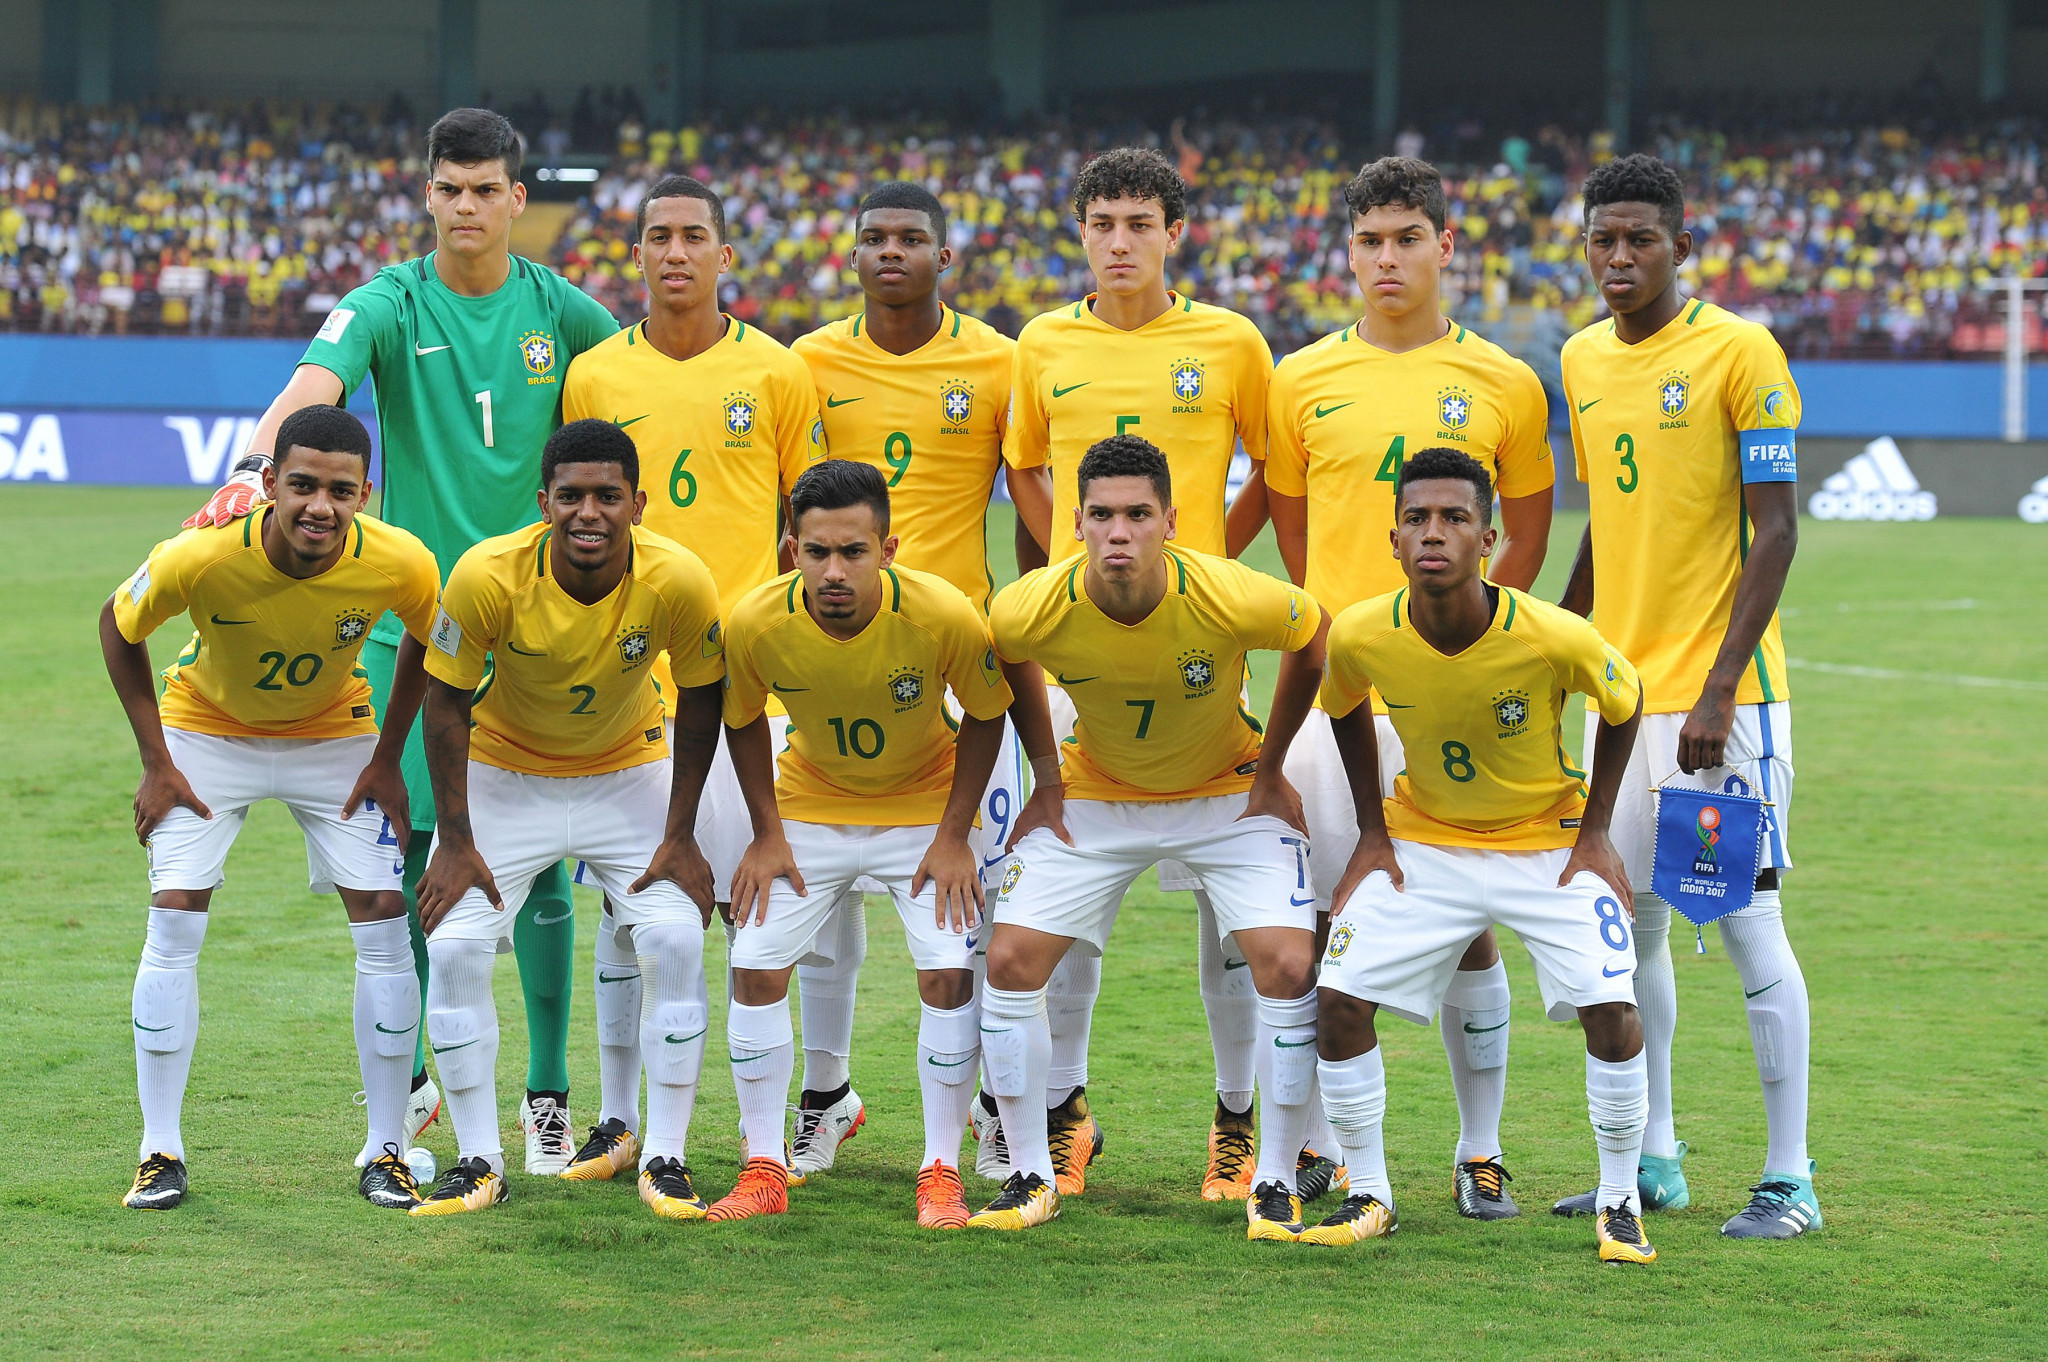 Brazil's Under-17s set up a mouth-watering last eight FIFA World Cup clash with Germany after defeating Honduras 3-0 ©Getty Images